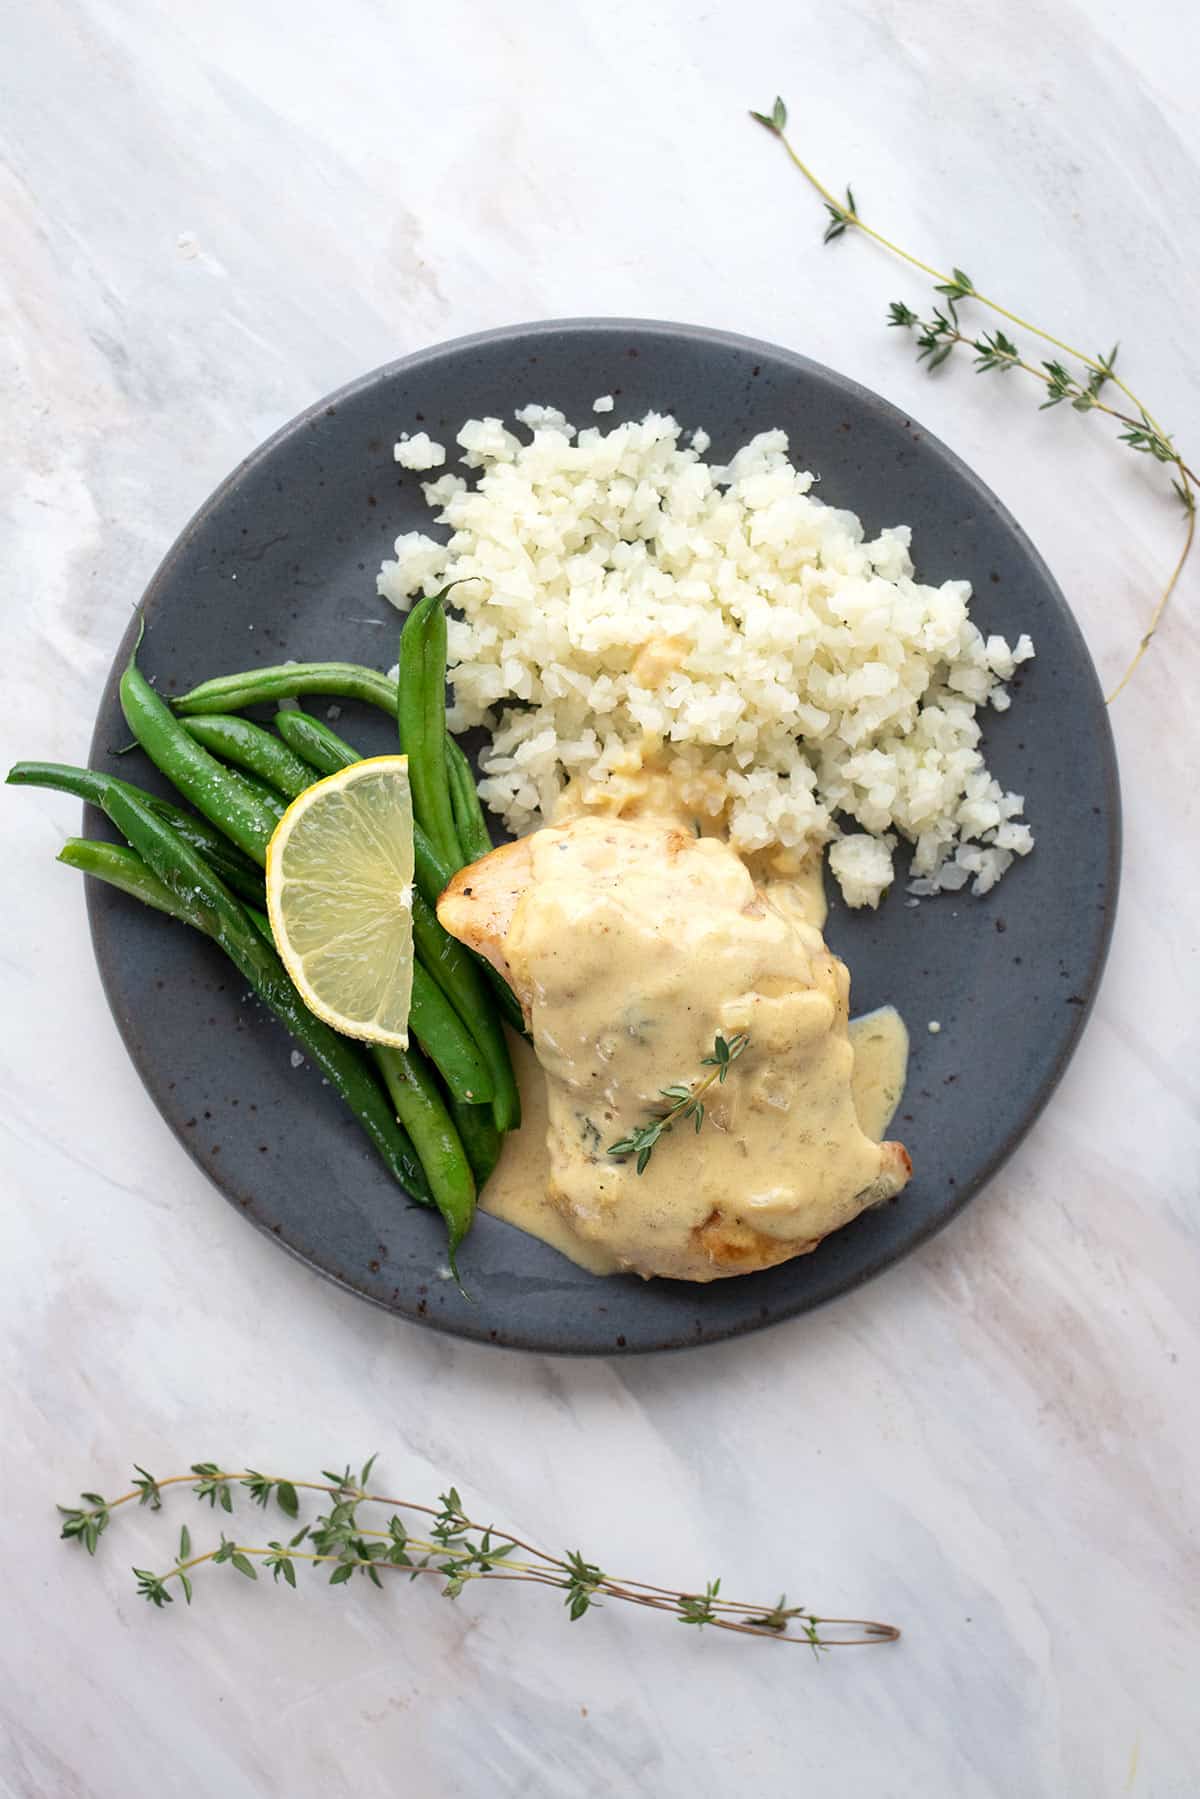 Top down image of a plate of Chicken Dijon with cauliflower rice and green beans.